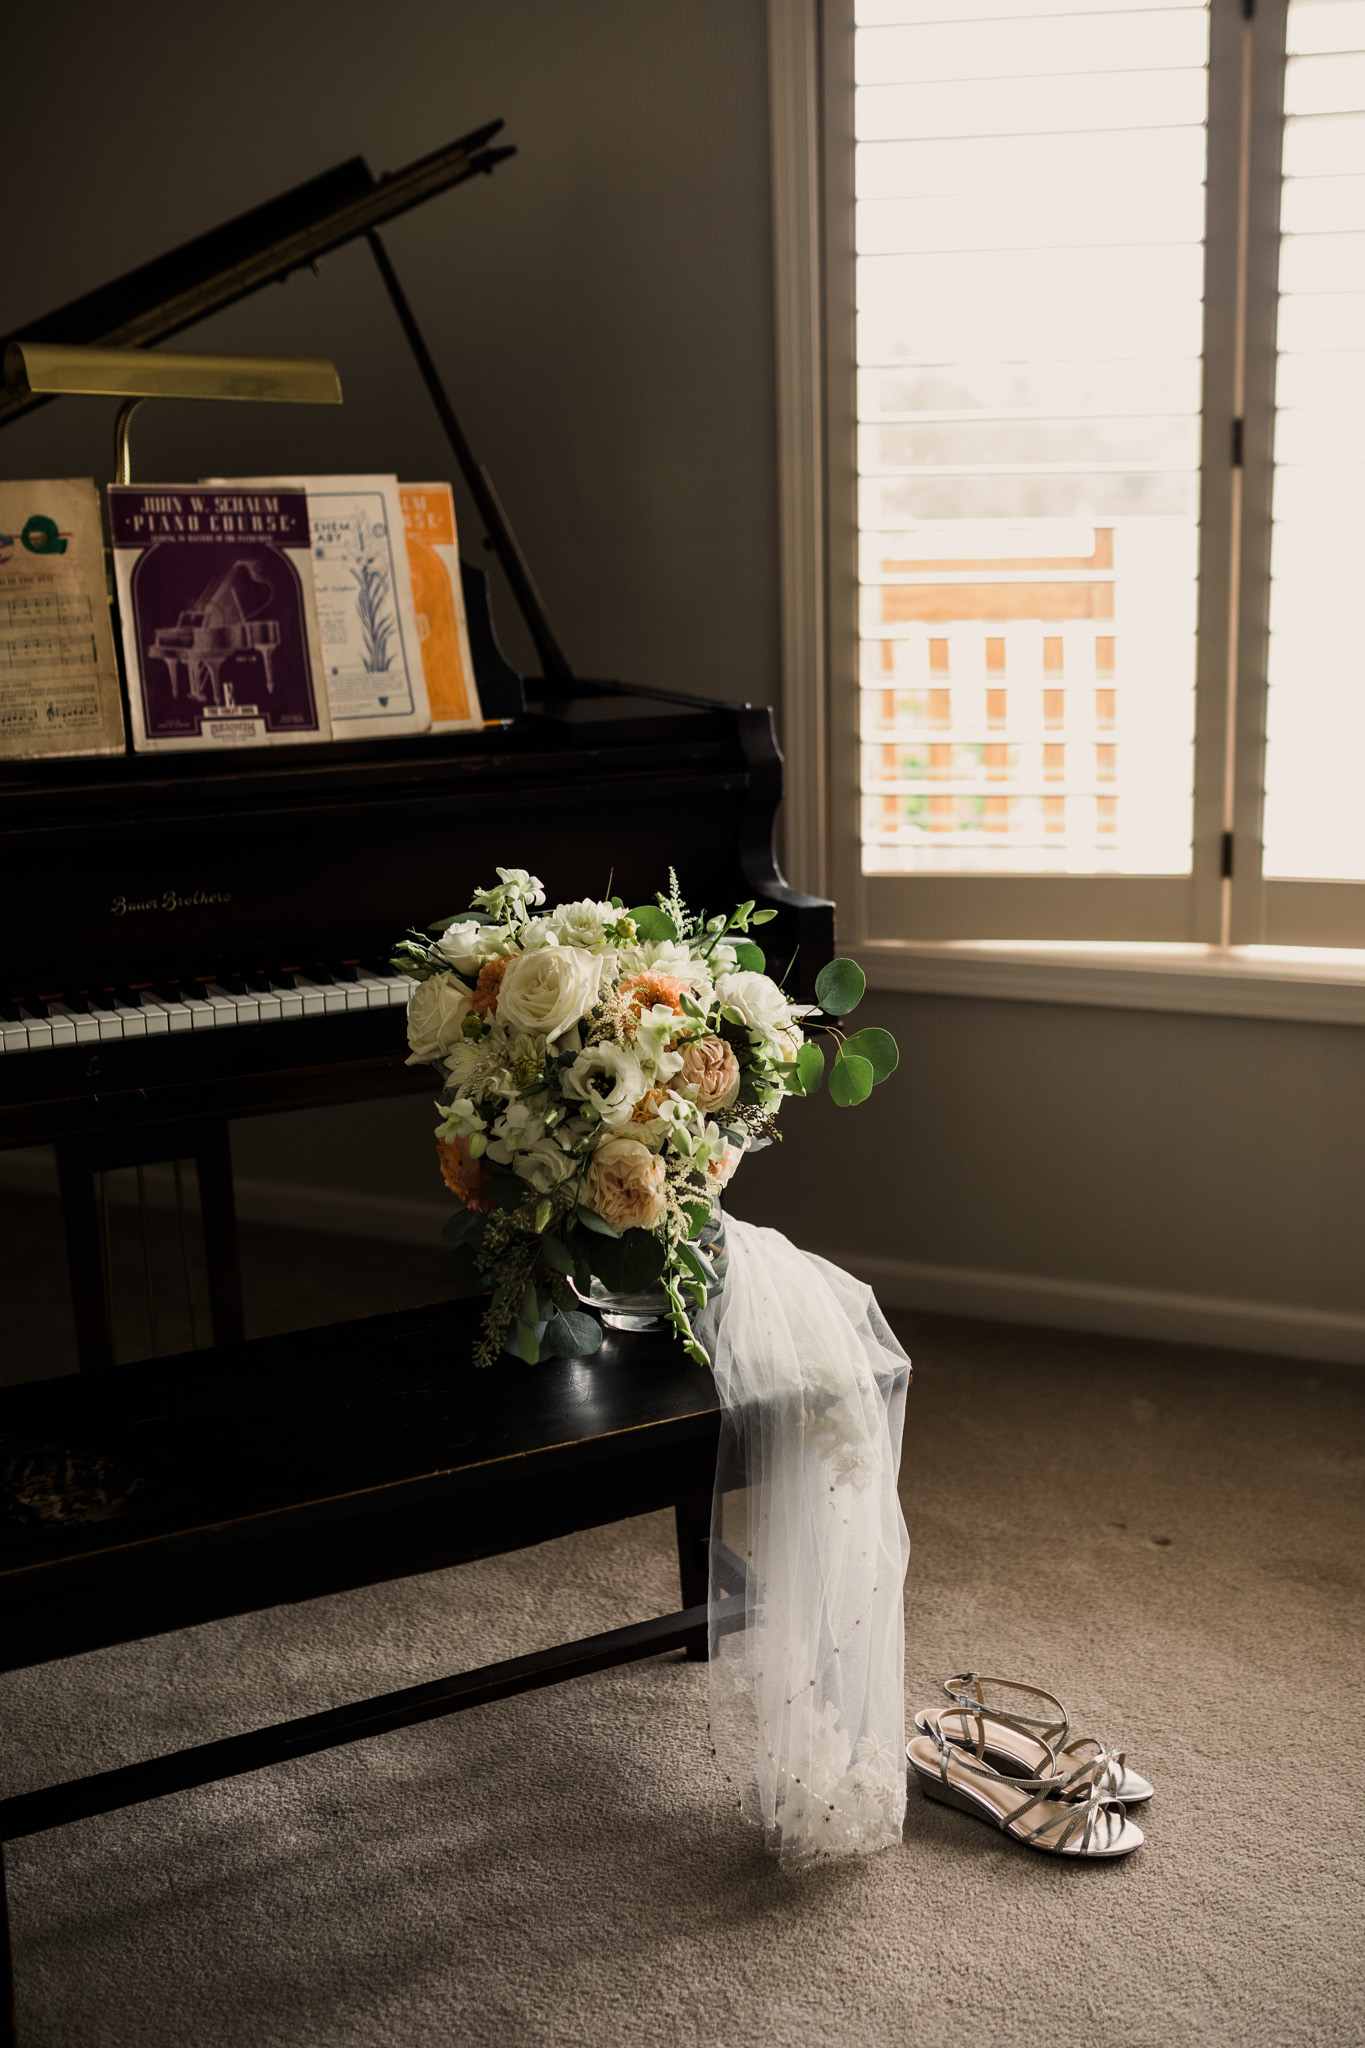 Details of a bouquet and veil by a piano, during an Indiana fall wedding.